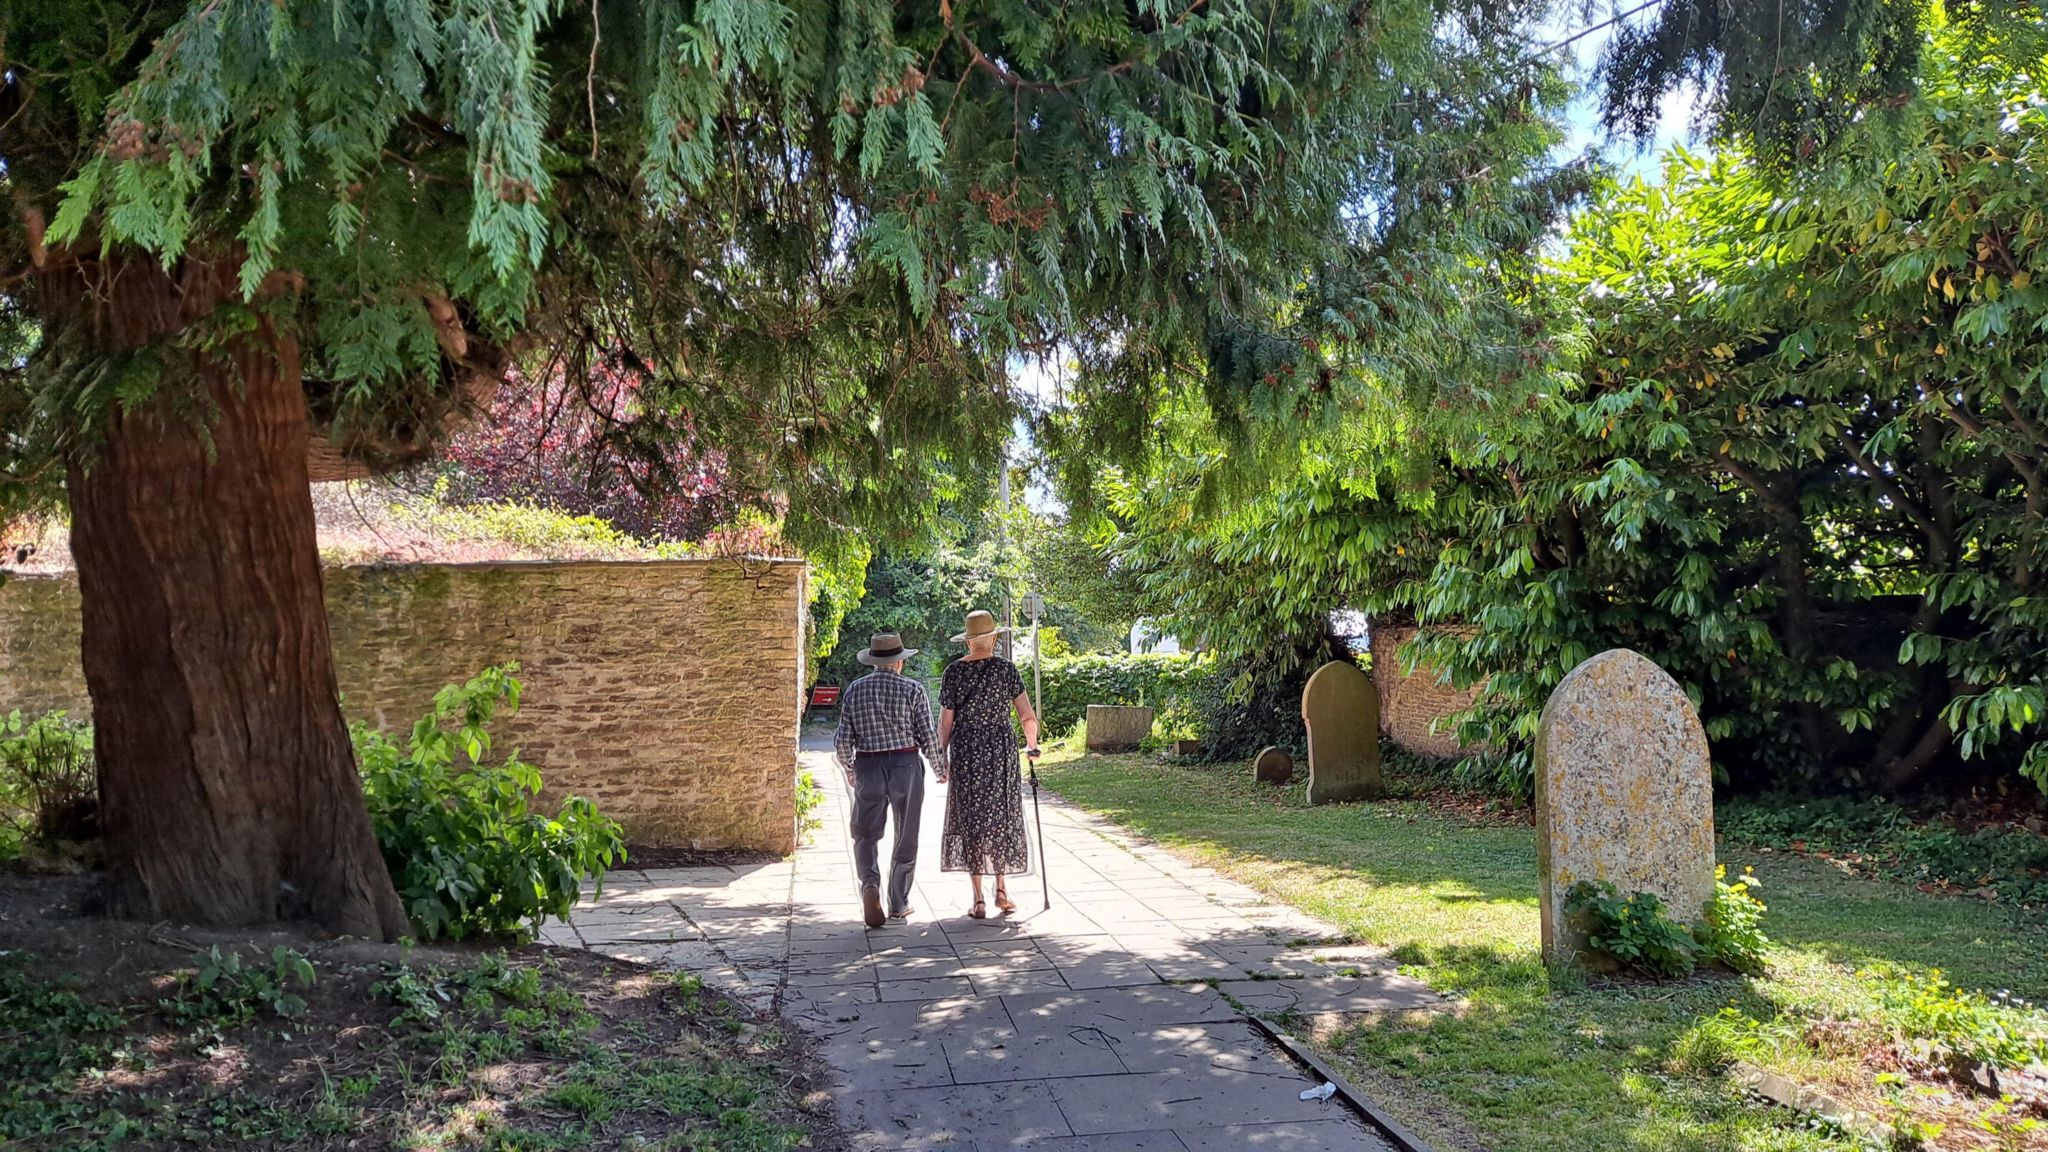 WEDNESDAY - A man and woman holding hands as they walk through a graveyard on a sunny day. They are both wearing straw hats. The woman is using a walking stick and is wearing a dress, the man is wearing a shirt and trousers. They are walking under a pine tree into the sunshine. On their left is a brick wall, on the right are several gravestones and a tall green hedge